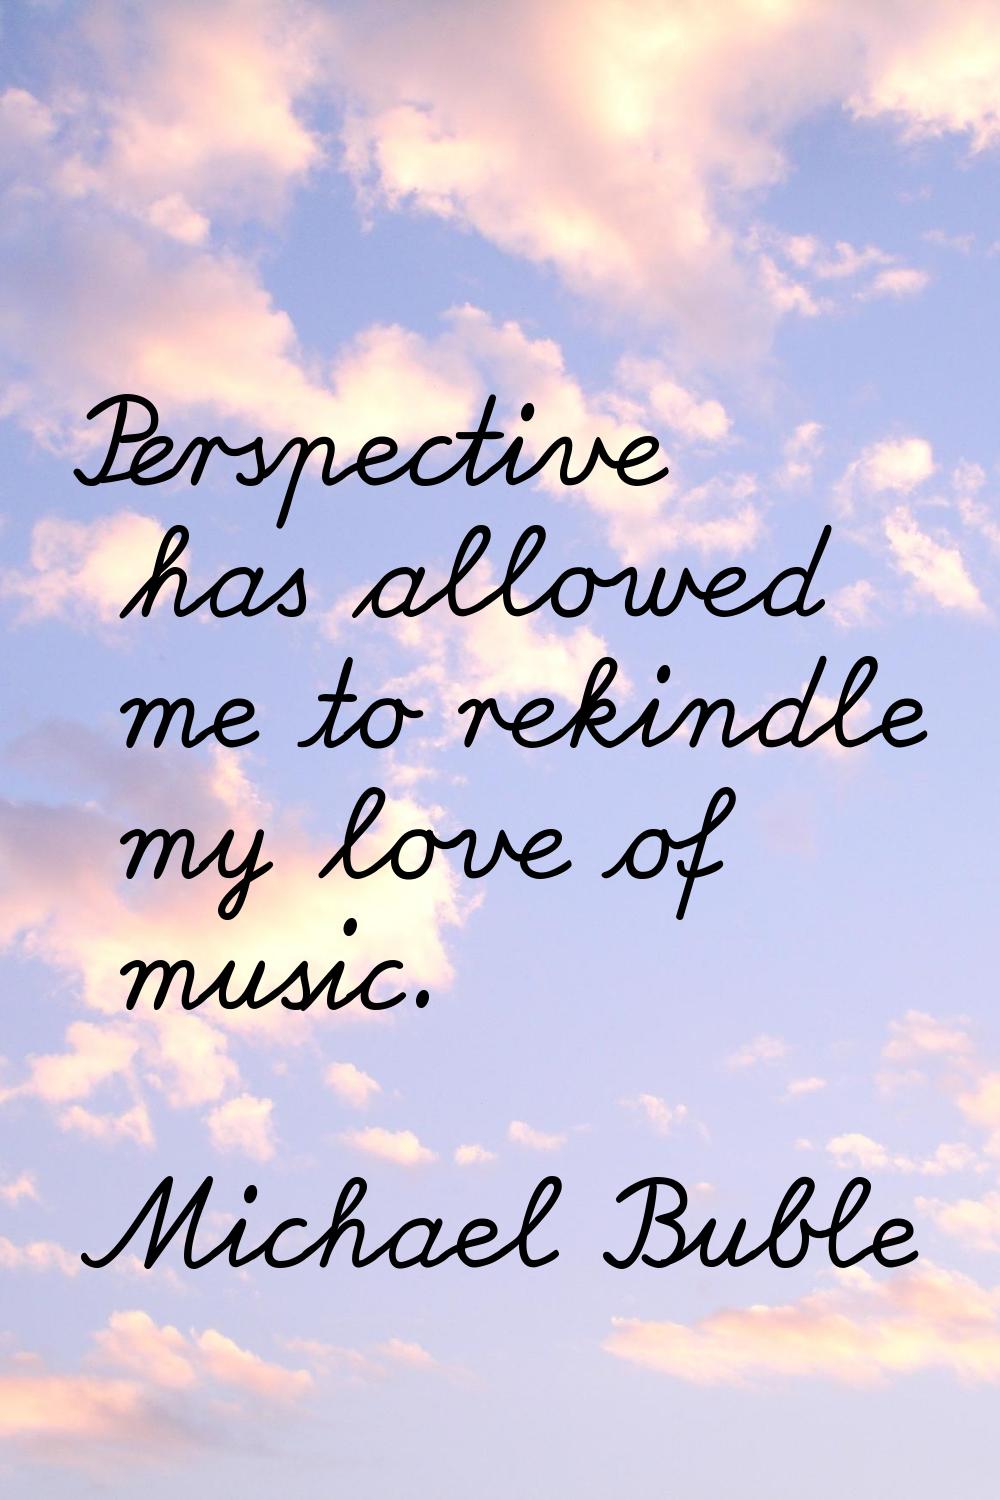 Perspective has allowed me to rekindle my love of music.